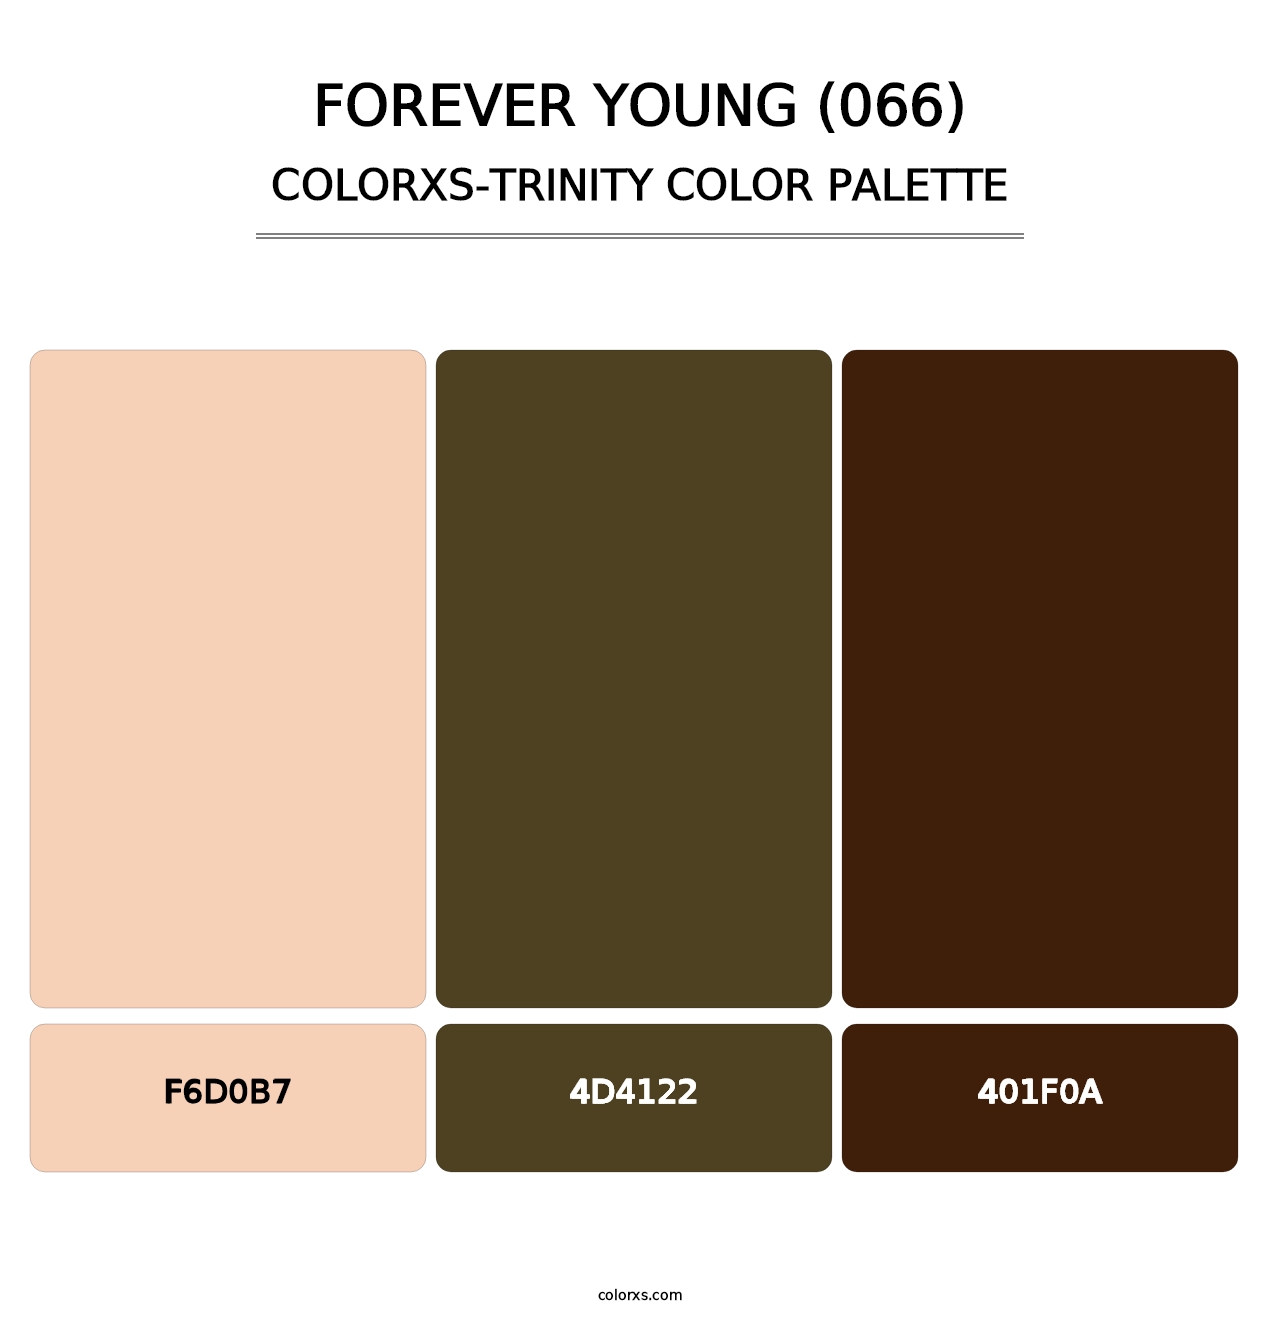 Forever Young (066) - Colorxs Trinity Palette